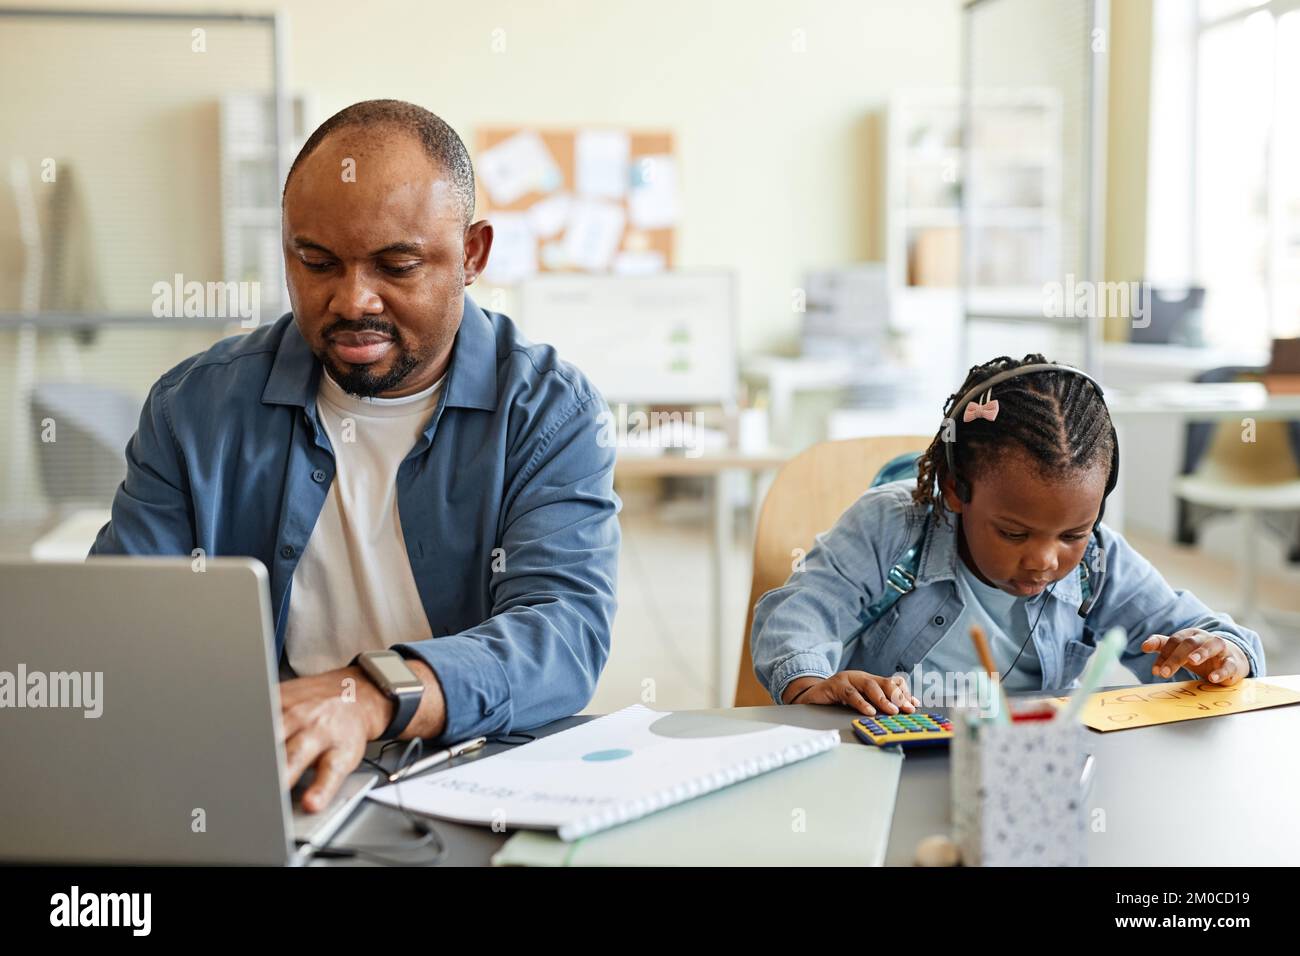 Front view portrait of black single father working from home with child playing with calculator beside him Stock Photo